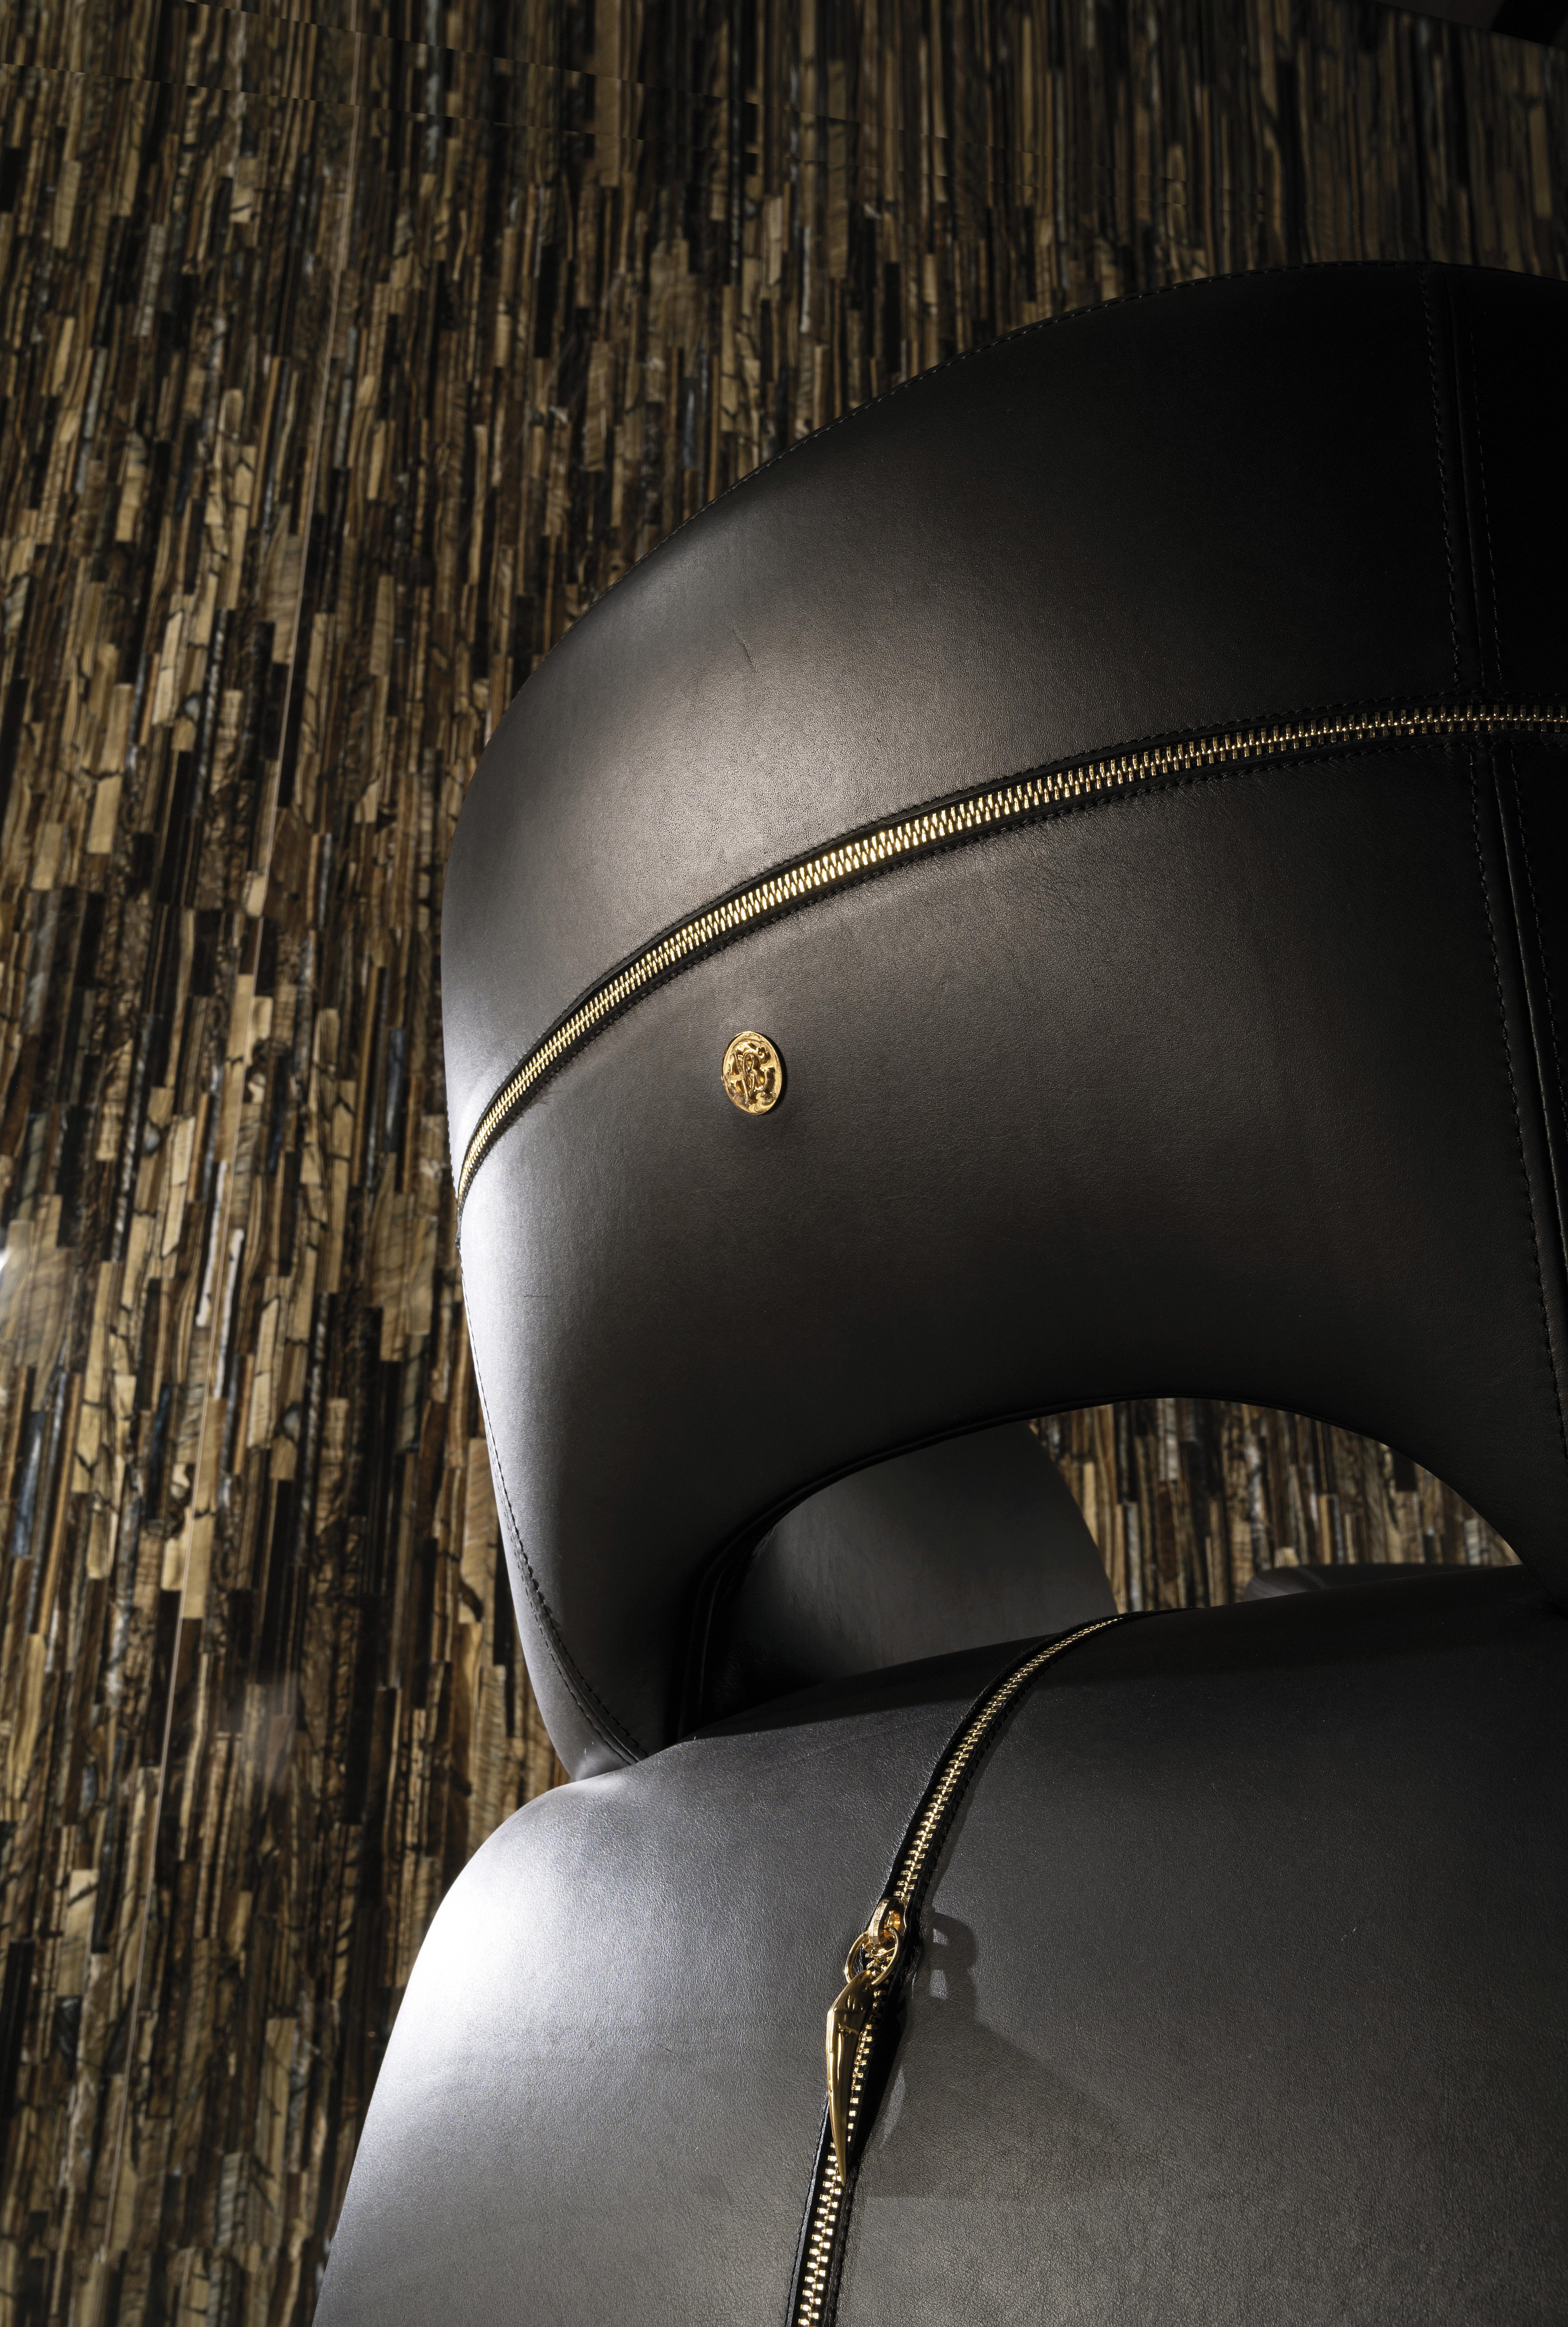 21st Century Wild Armchair in Black Leather by Roberto Cavalli Home Interiors For Sale 2